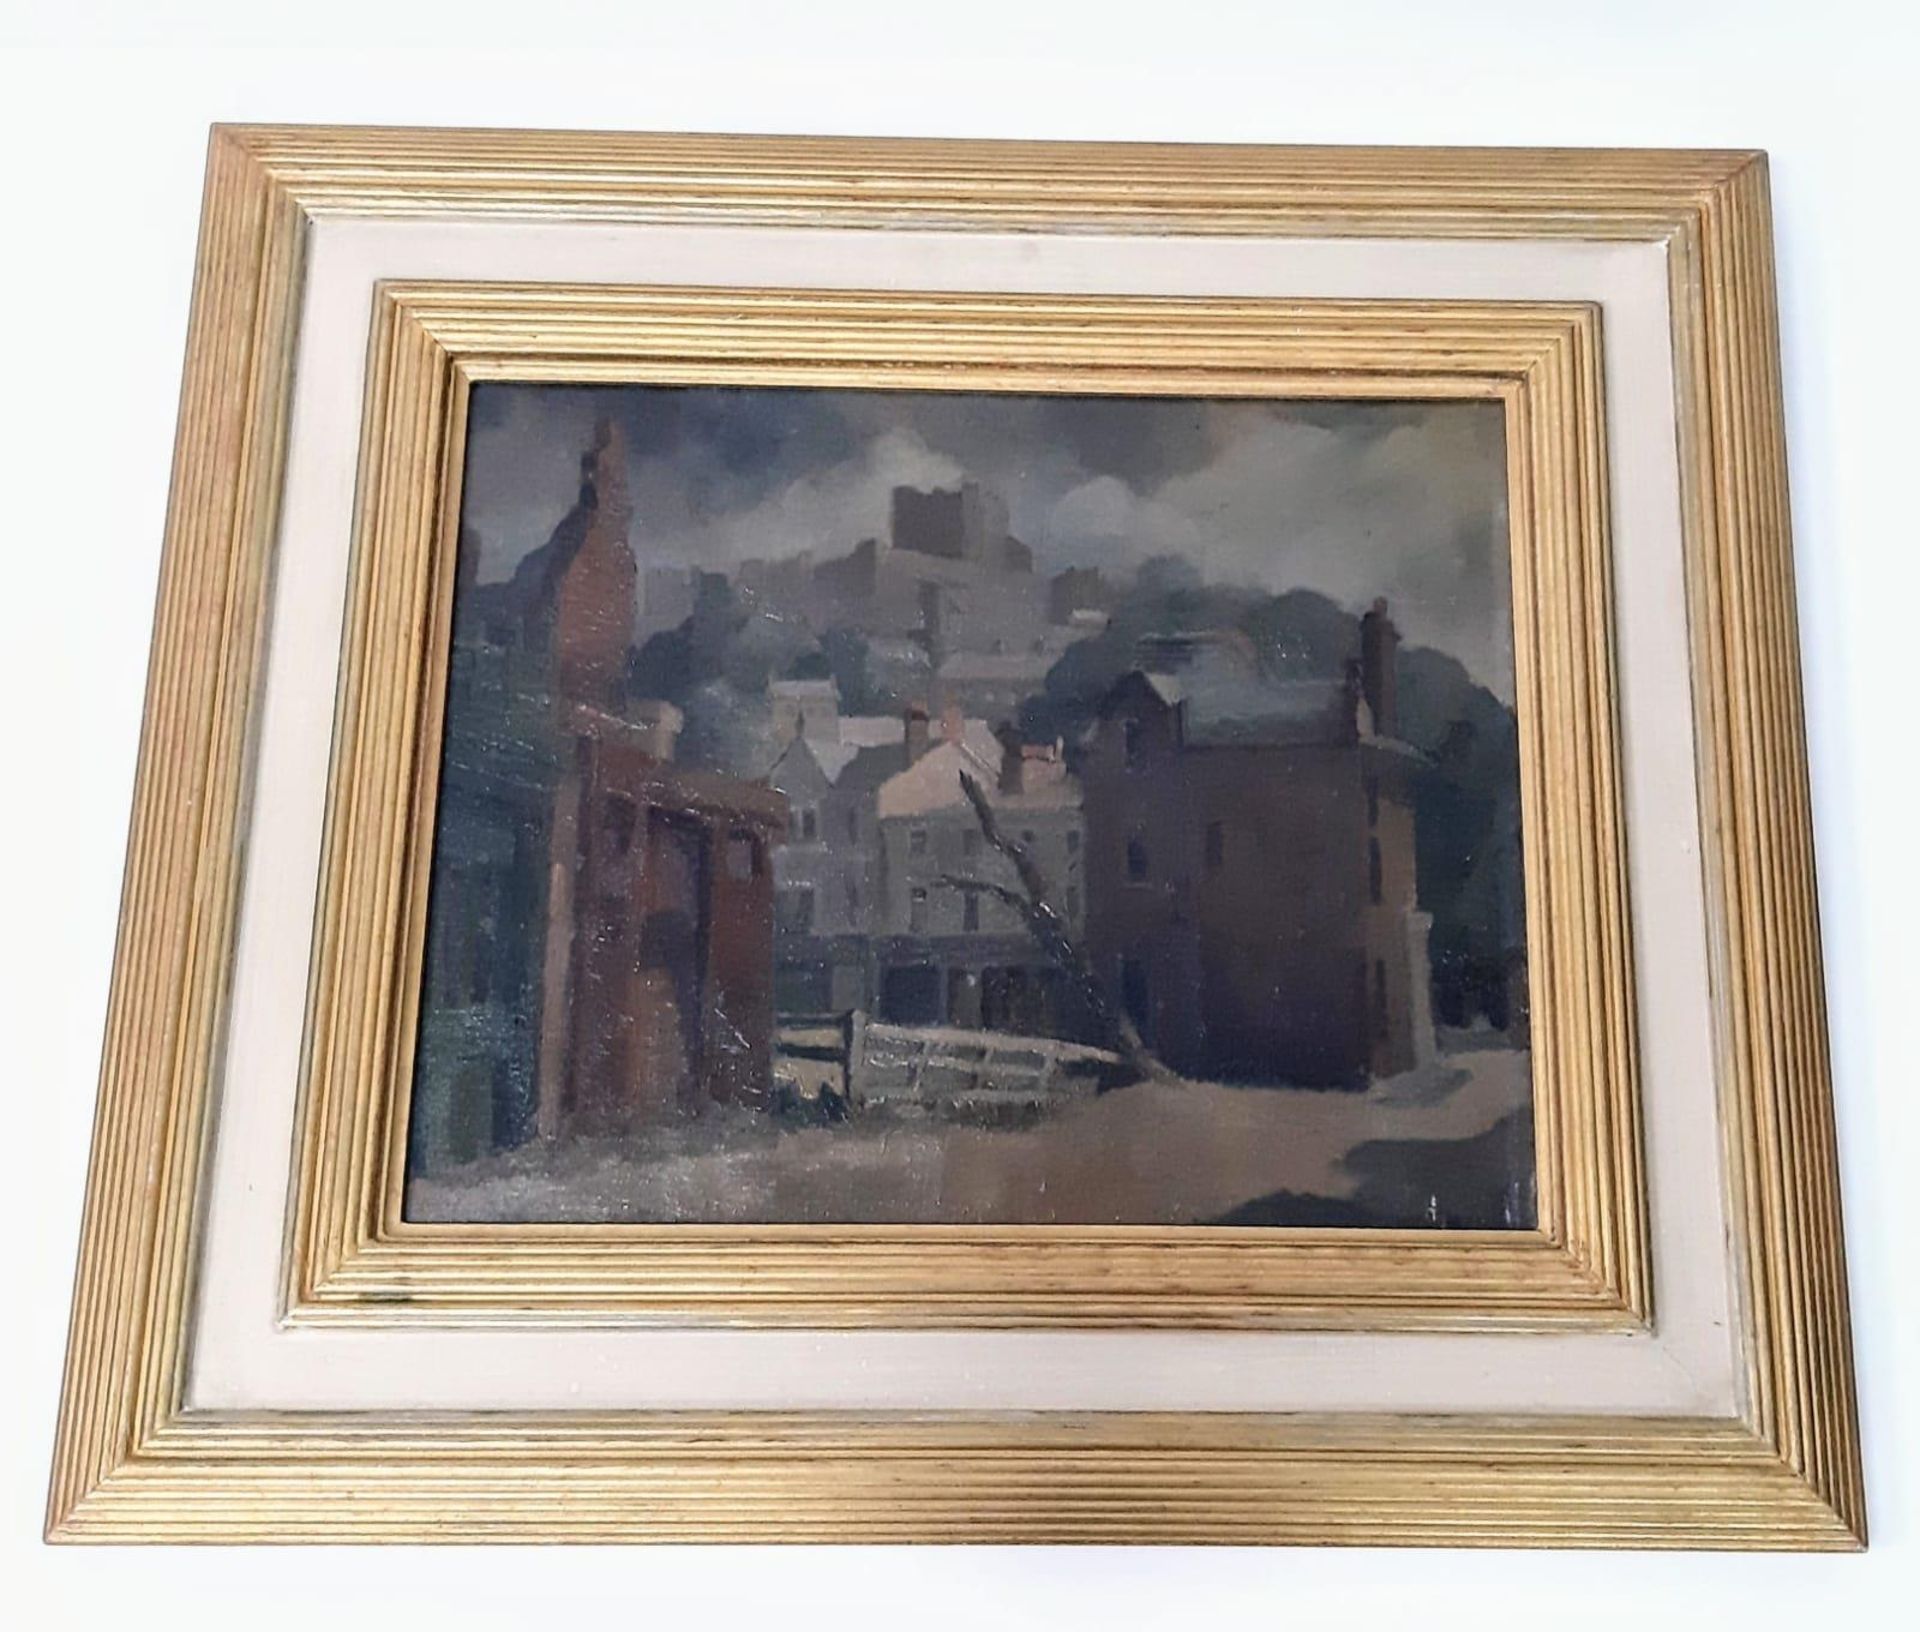 A unique collection of art by known British artist, Clifford Charman (1910-1992). Firstly, 'View - Image 2 of 12